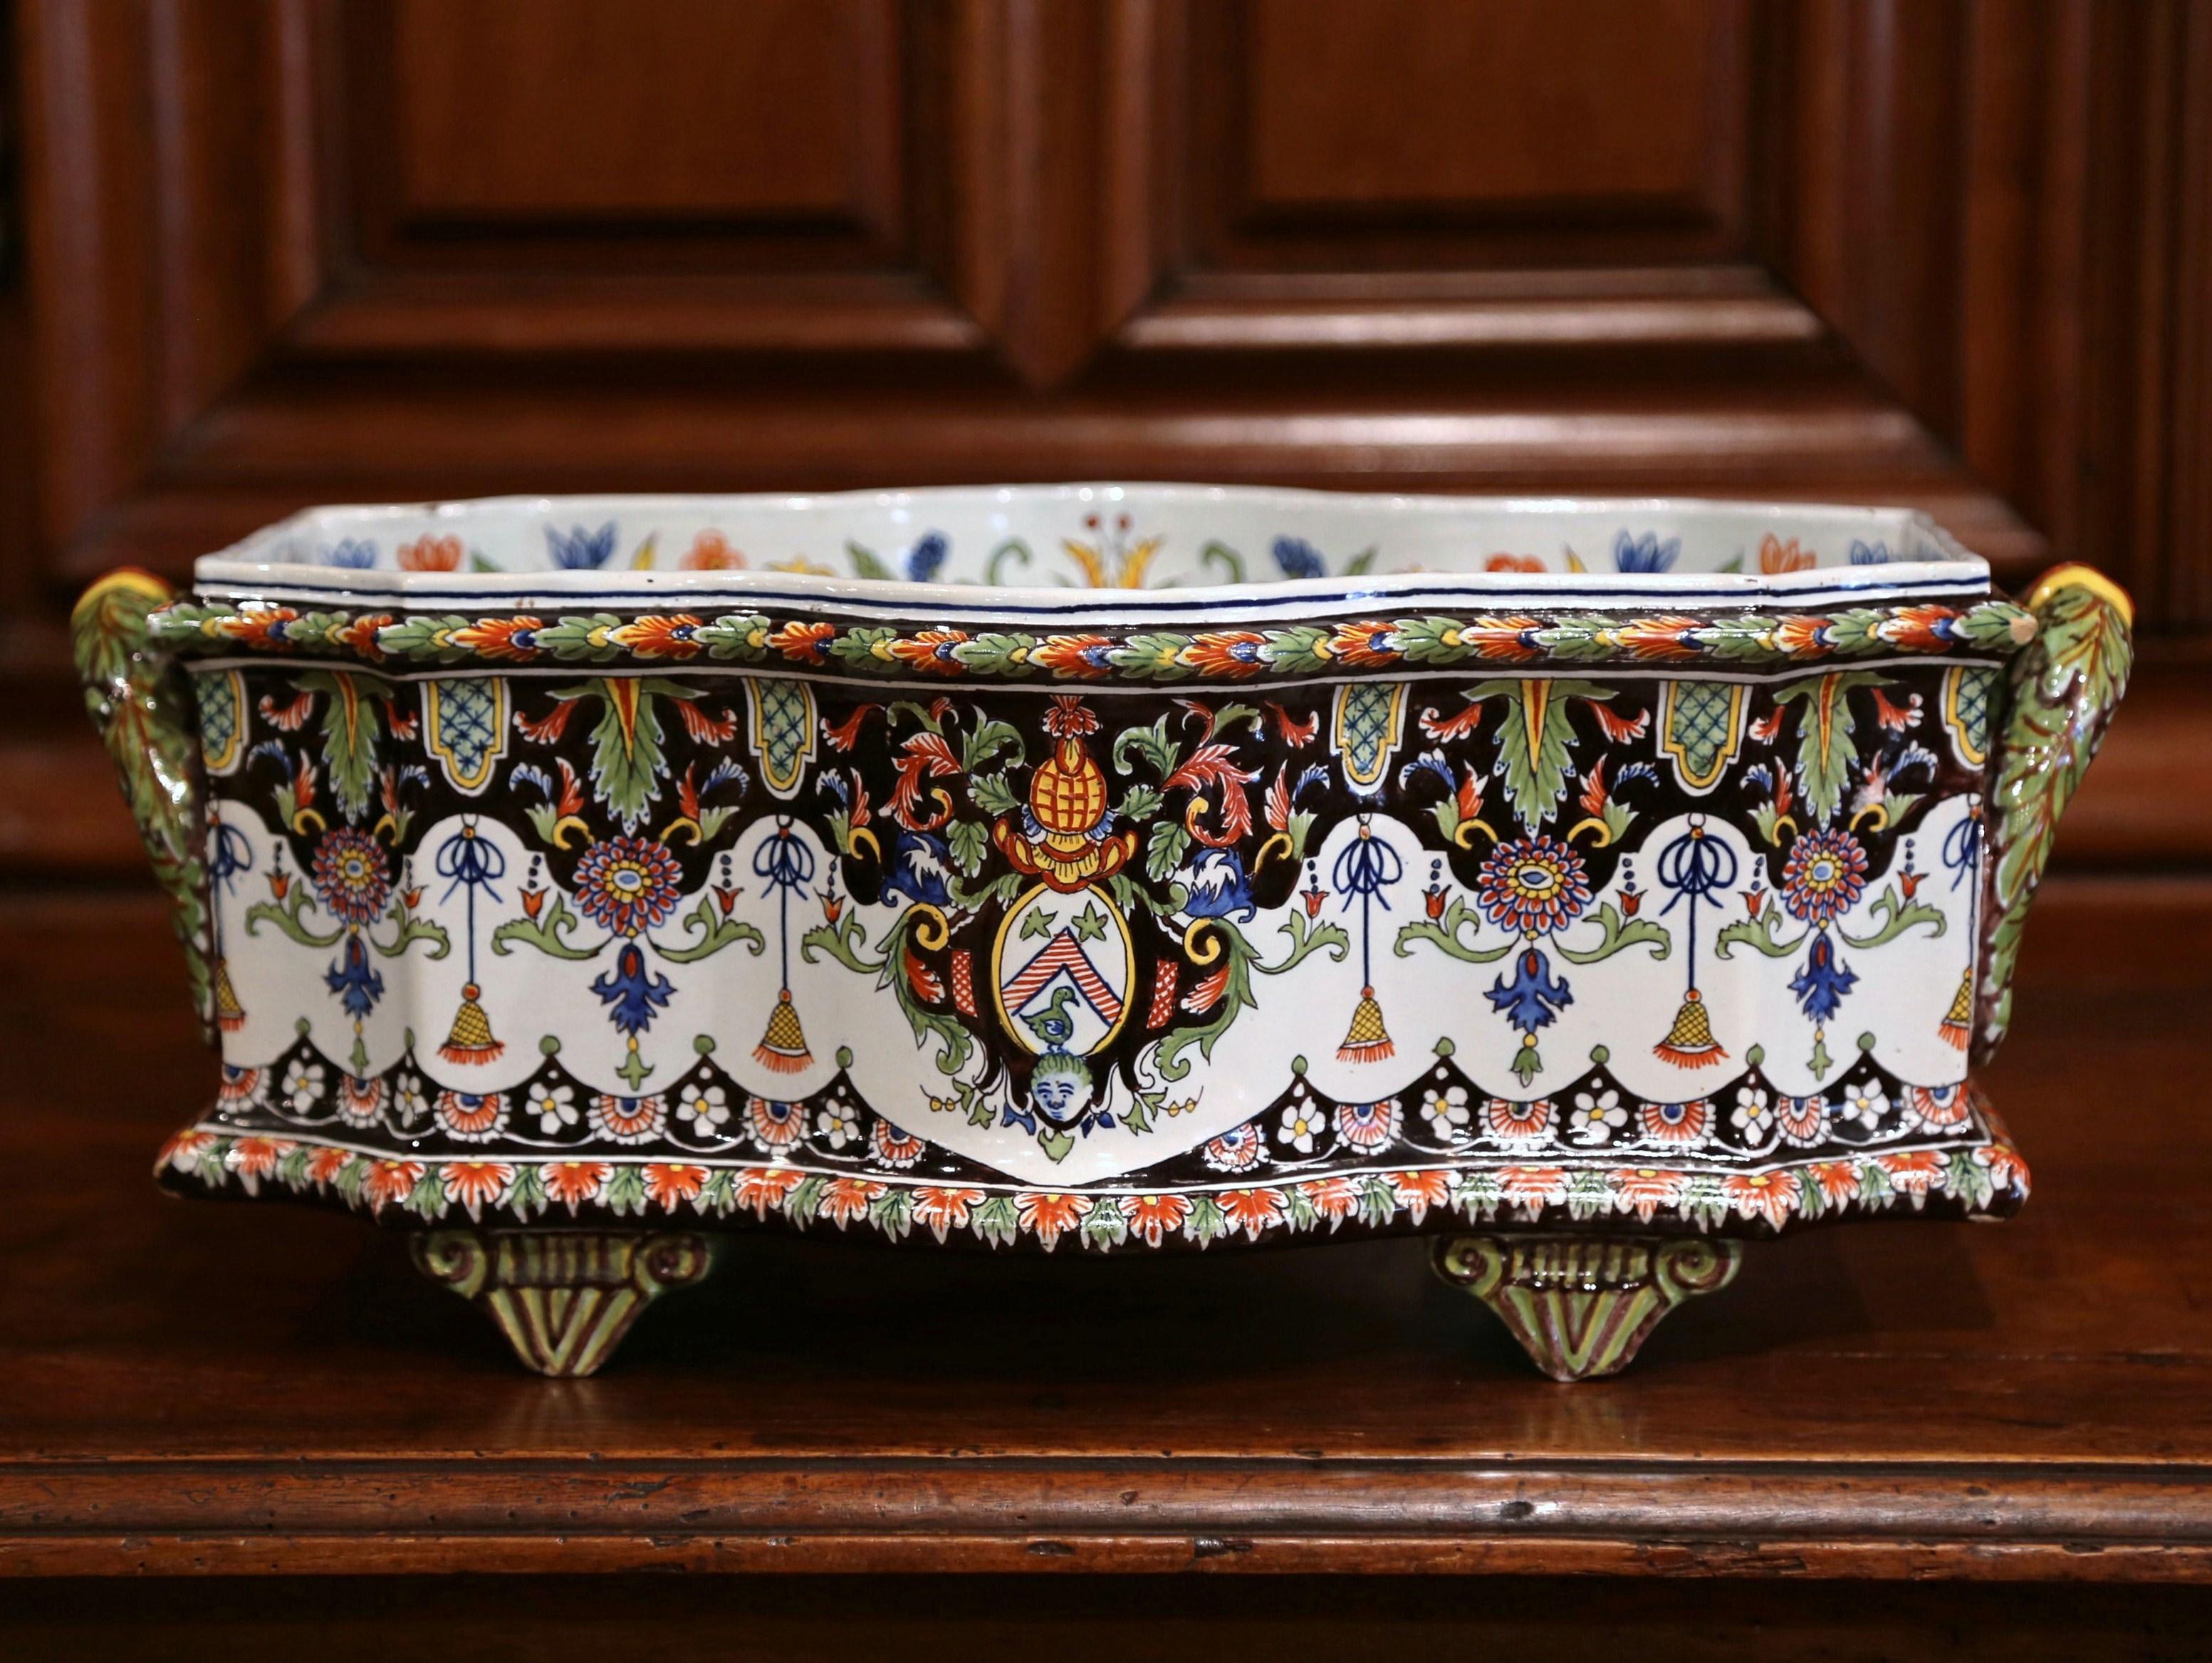 Decorate a mantel or a dining room table with this colorful antique jardinière. Crafted in Rouen, Northern France circa 1890 and rectangular in shape, the ceramic planter stands on four small tapered feet and is embellished with side handles. The